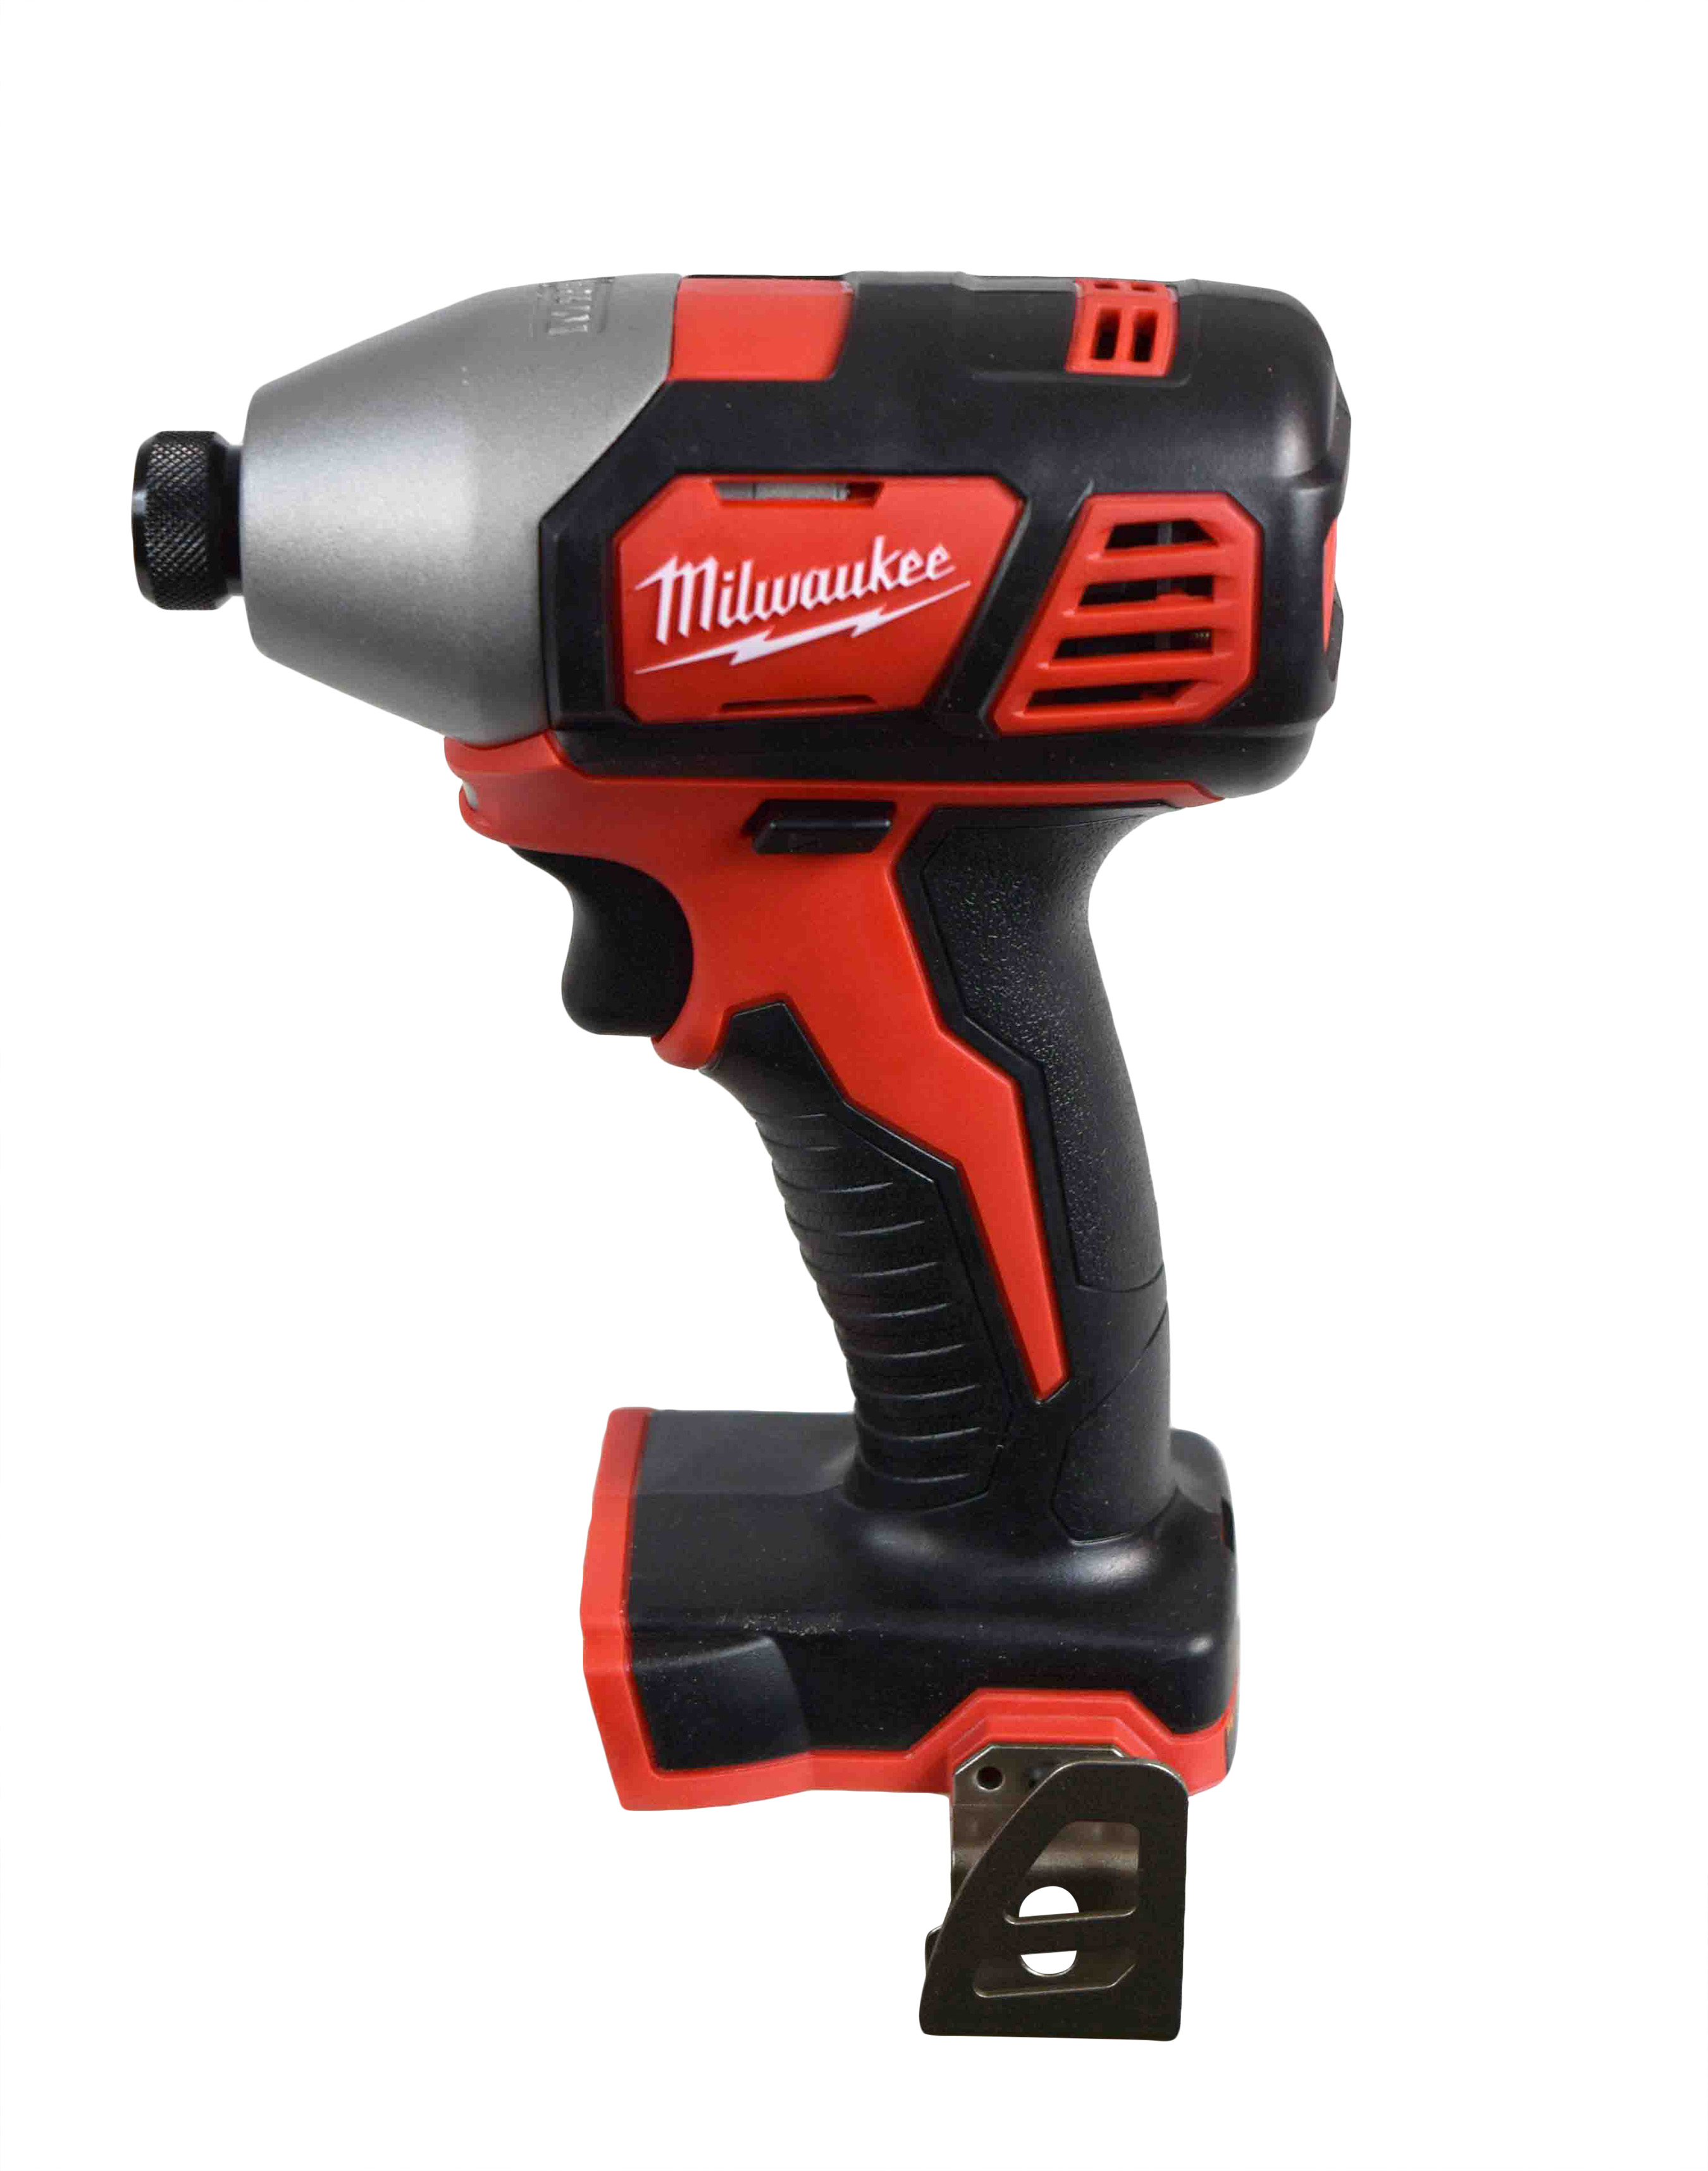 Milwaukee M18 Cordless 18V 4-Tool Kit (Drill/Driver, Hackzall, Impact Driver,  Light) 2695-24 with (2) 3Ah Batteries, Charger,  Tool Bag